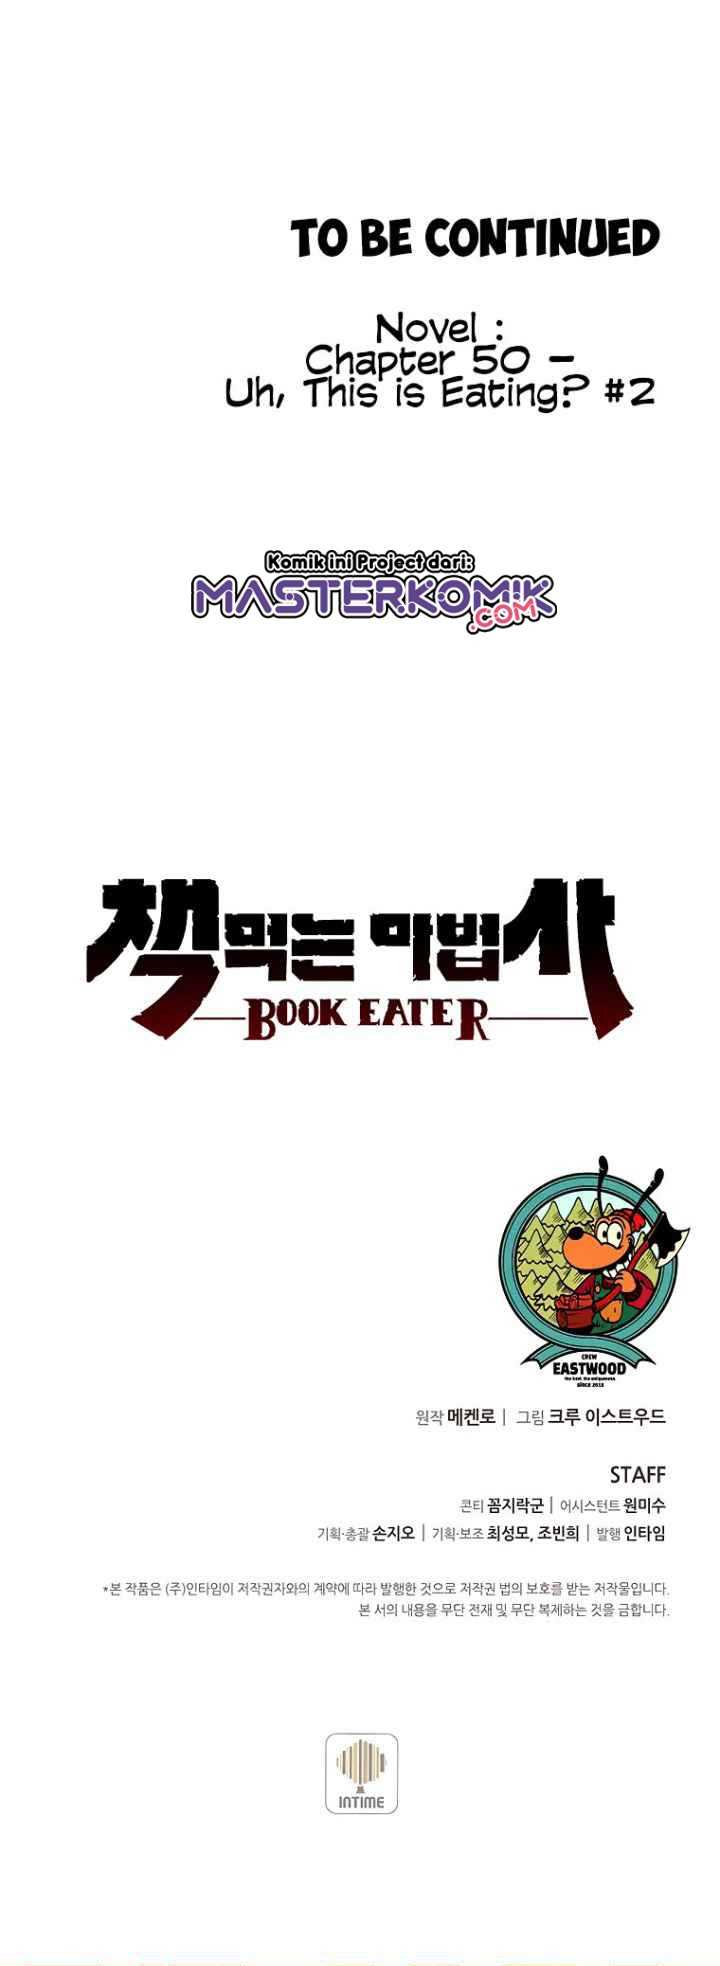 The Book Eating Magician (Book Eater) Chapter 39